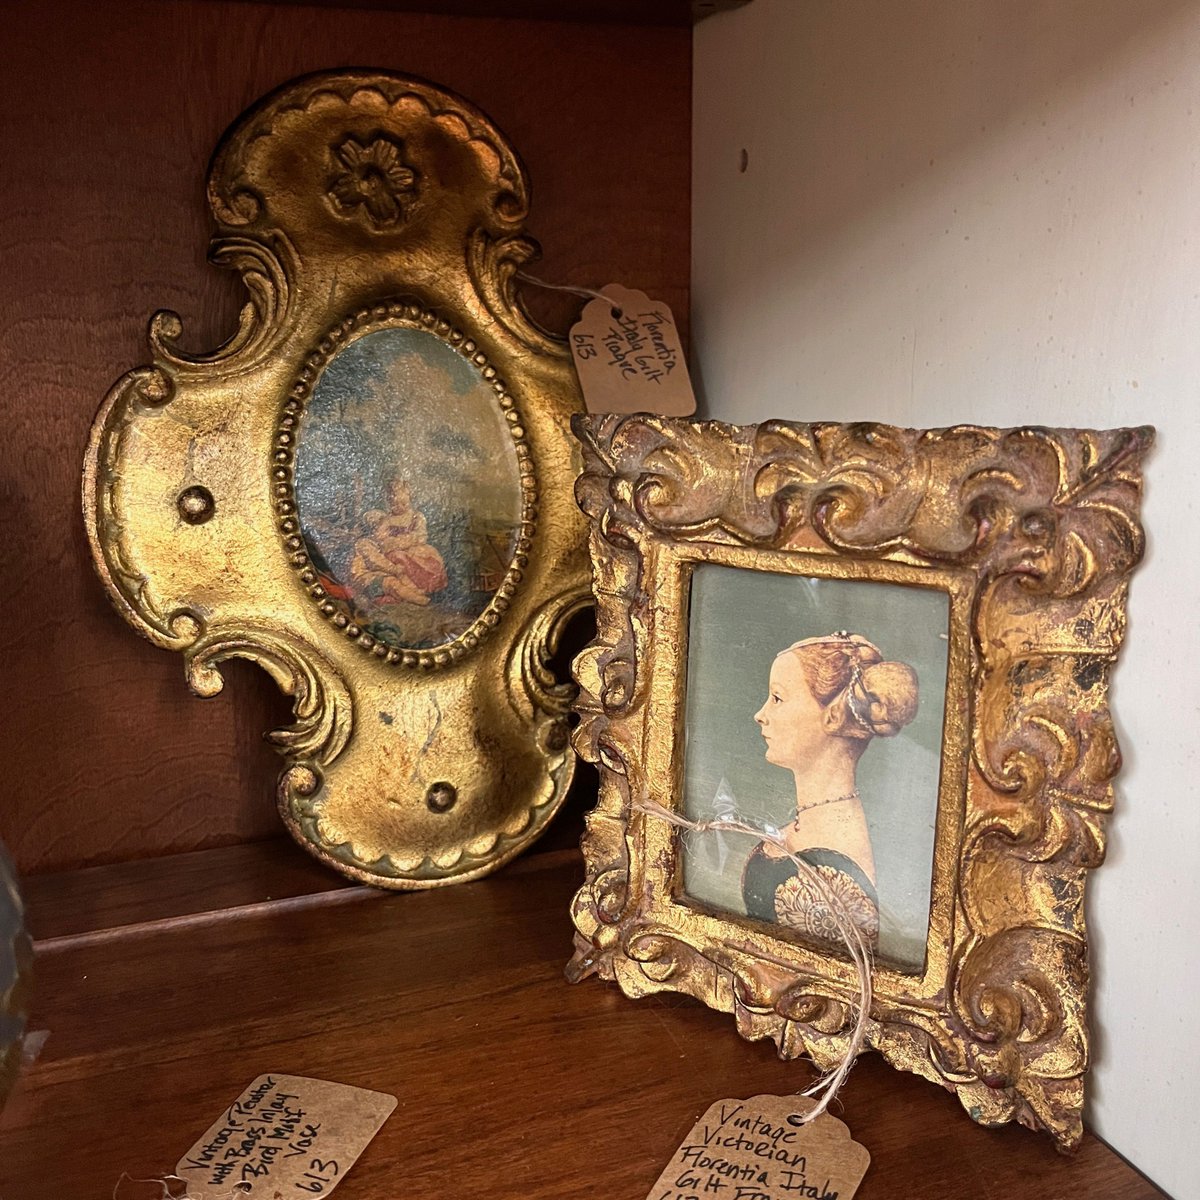 Just dropped a few Antique Italian Gilt Vignettes into my booth at the Exmore Antique Emporium - come see what's new!

#exmore #esva #easternshoreva #antiques #retrohome #retroaesthetic #exmoreva #exmoreantiqueemporium #exmoreantiques #antiquesexmore #vendormall #homedecor